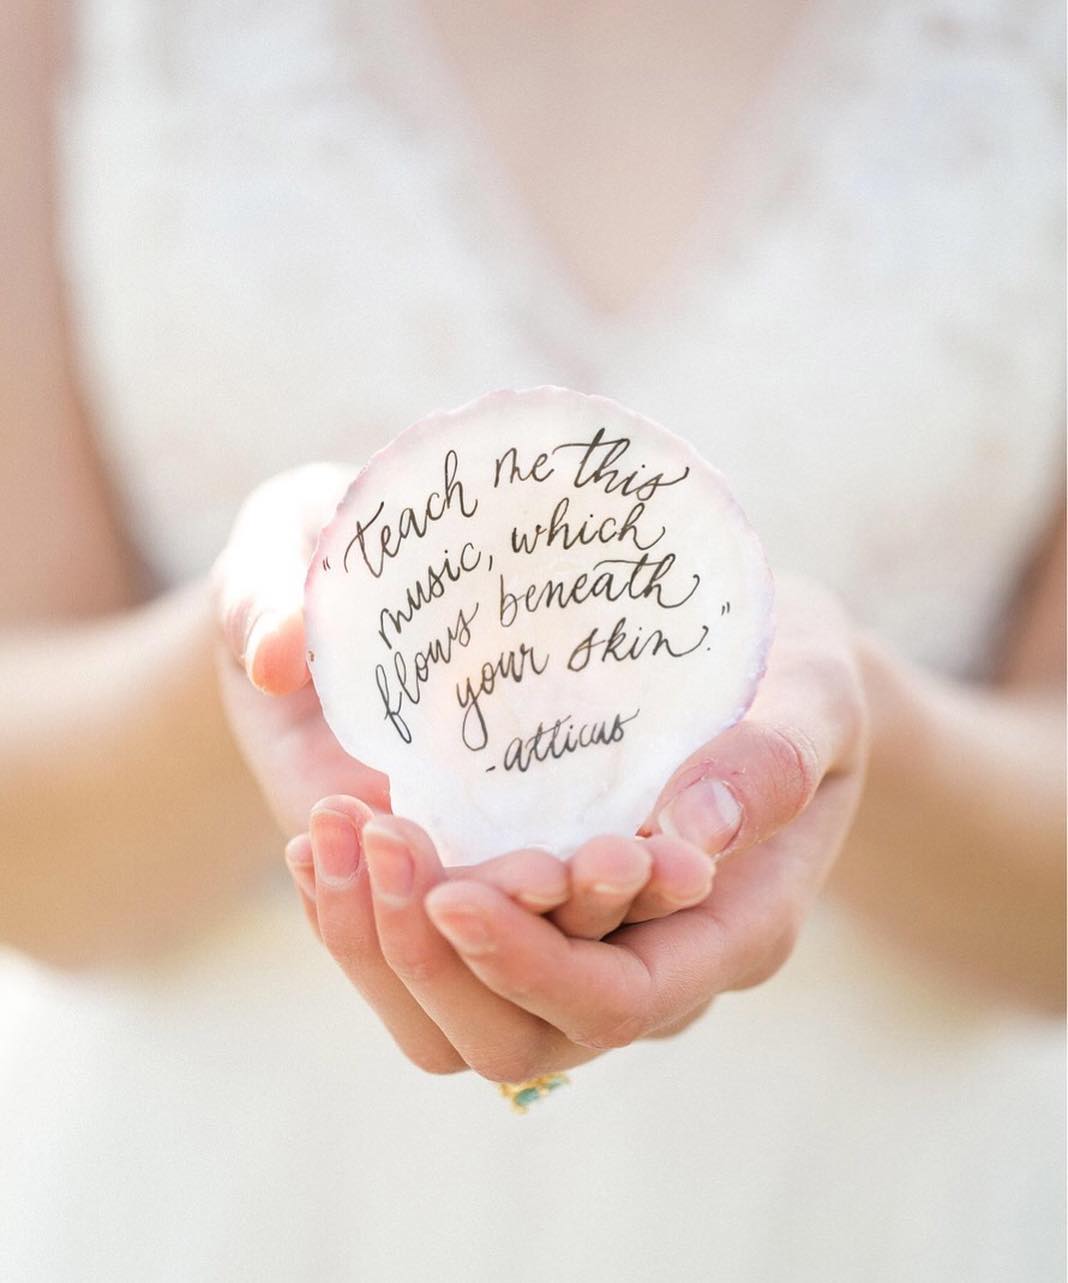 Atticus love quote calligraphed on a seashell for an Old World coastal wedding inspiration in Dorset, England | Calligraphy by Dominique Alba, design by Willow and Oak Events and photography by Anneli Marinovitch